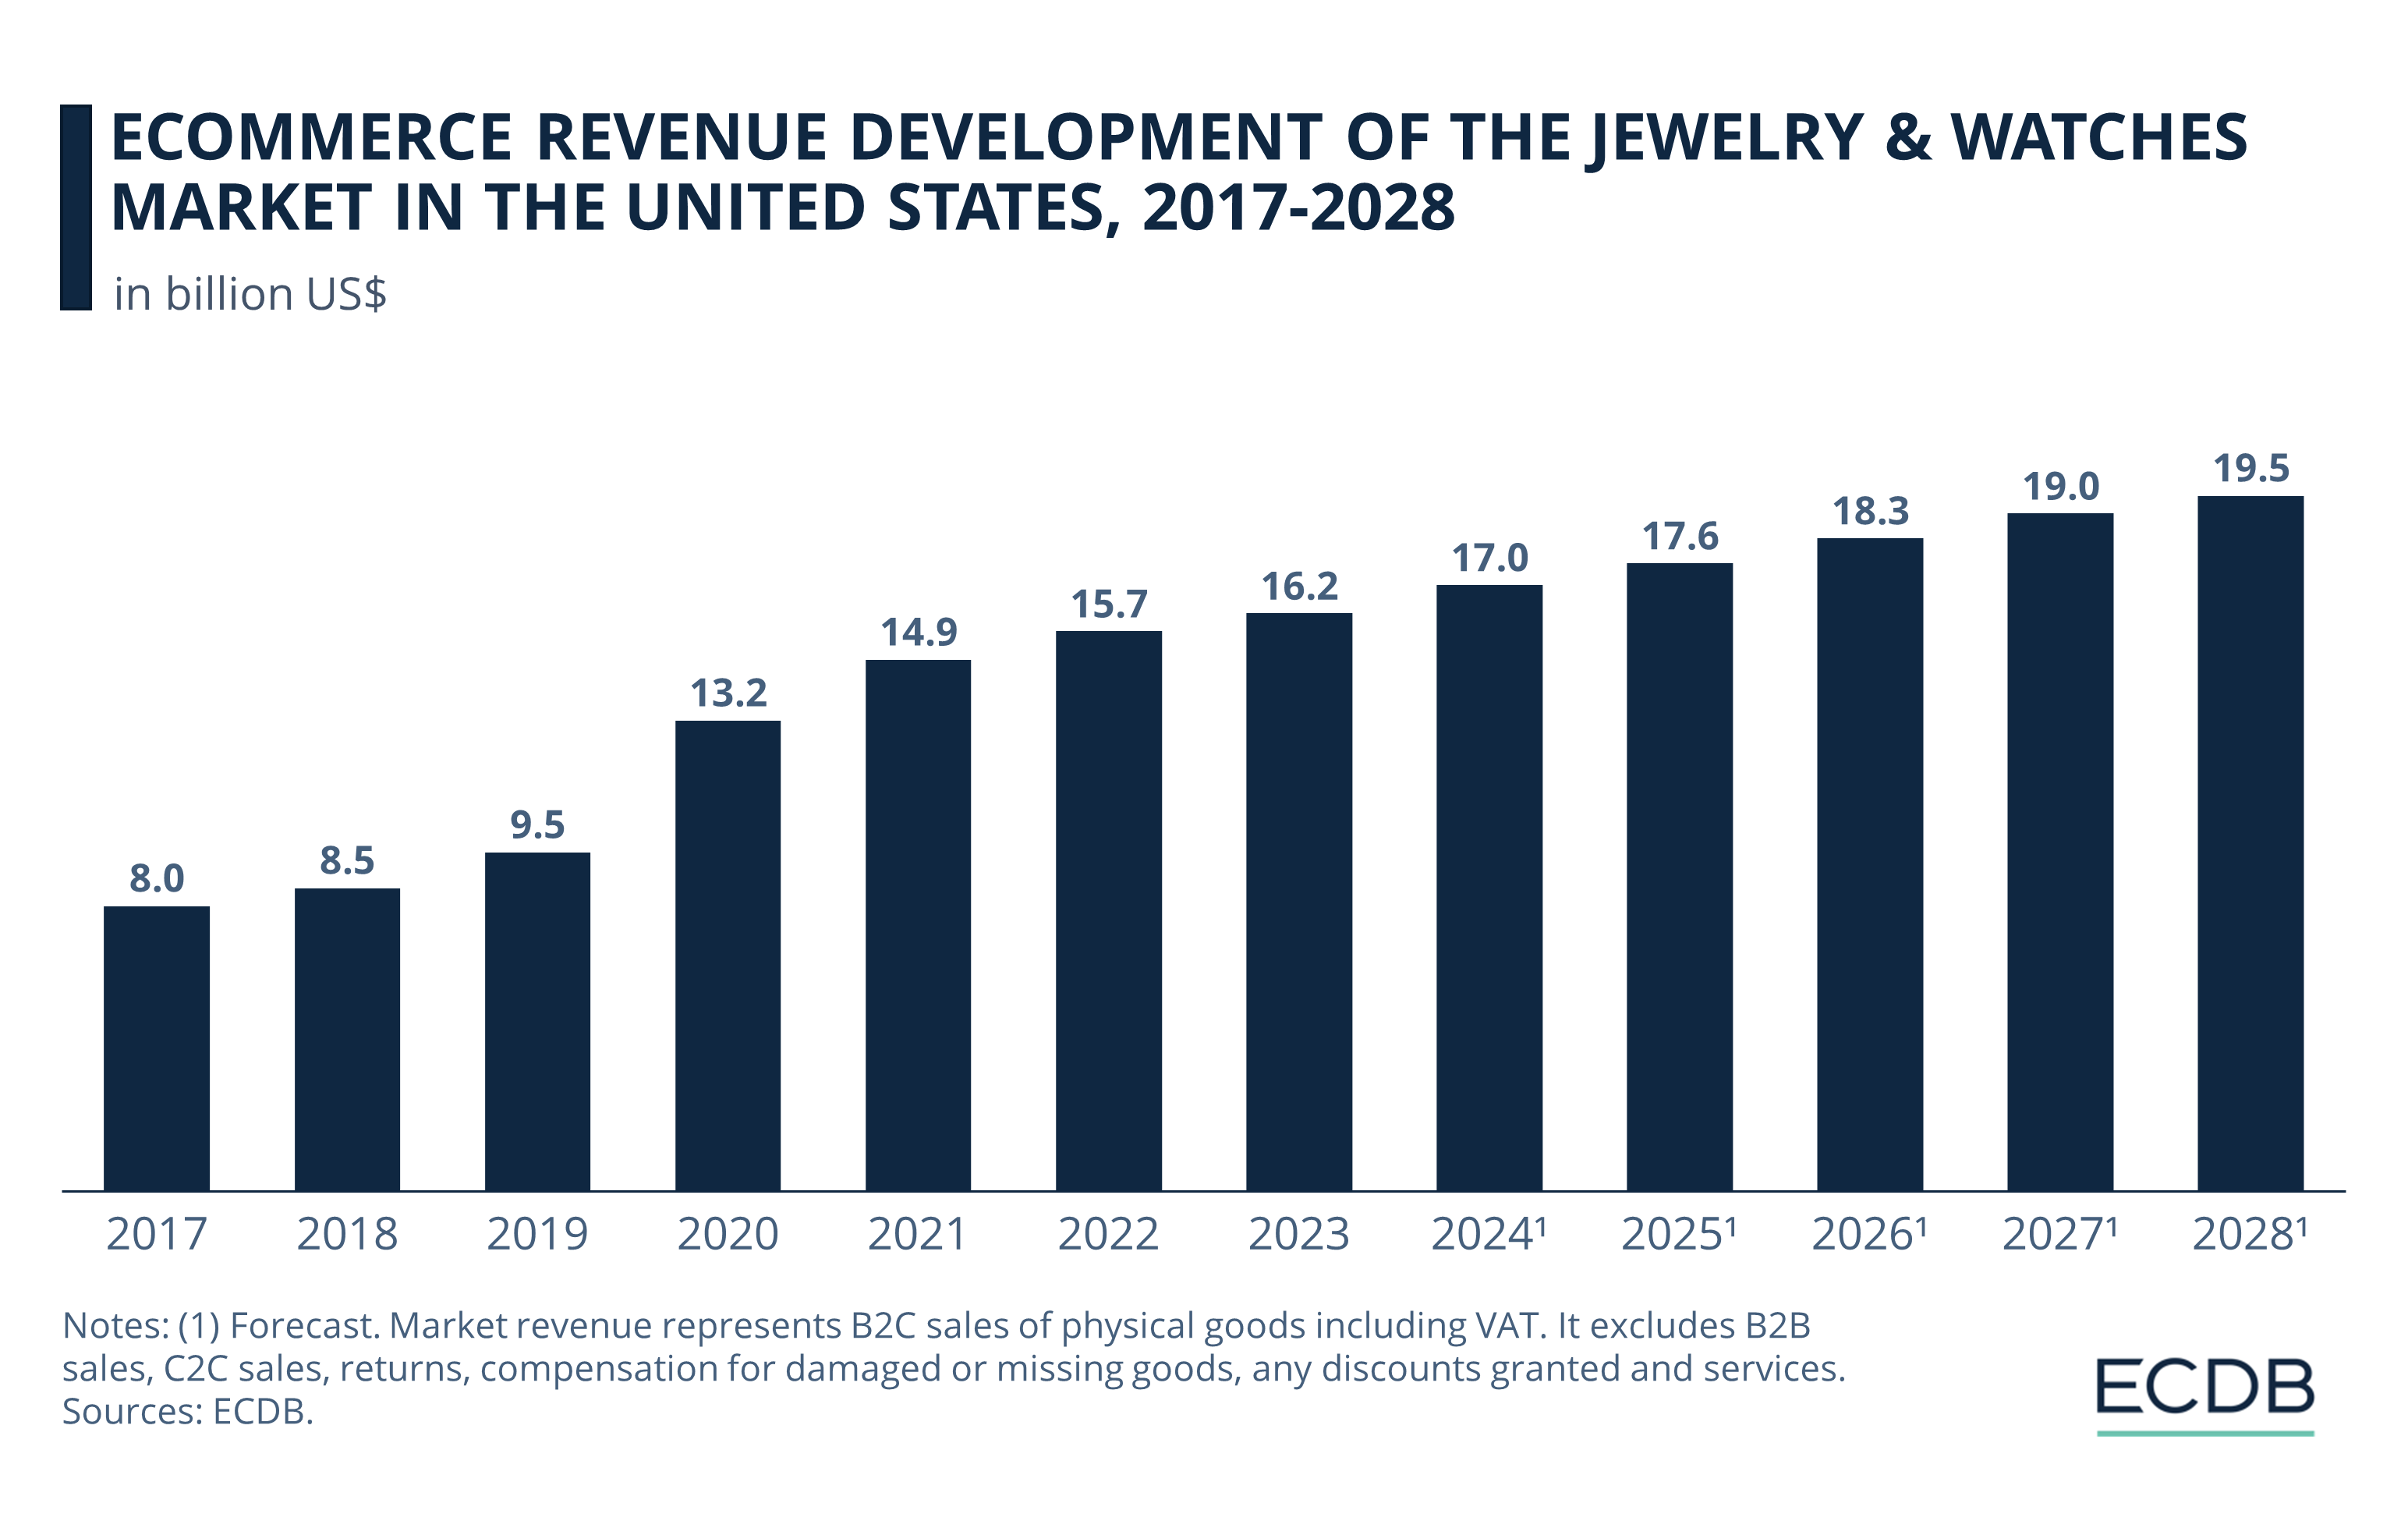 eCommerce Revenue Development of the Jewelry & Watches Market in the United States, 2017-2028